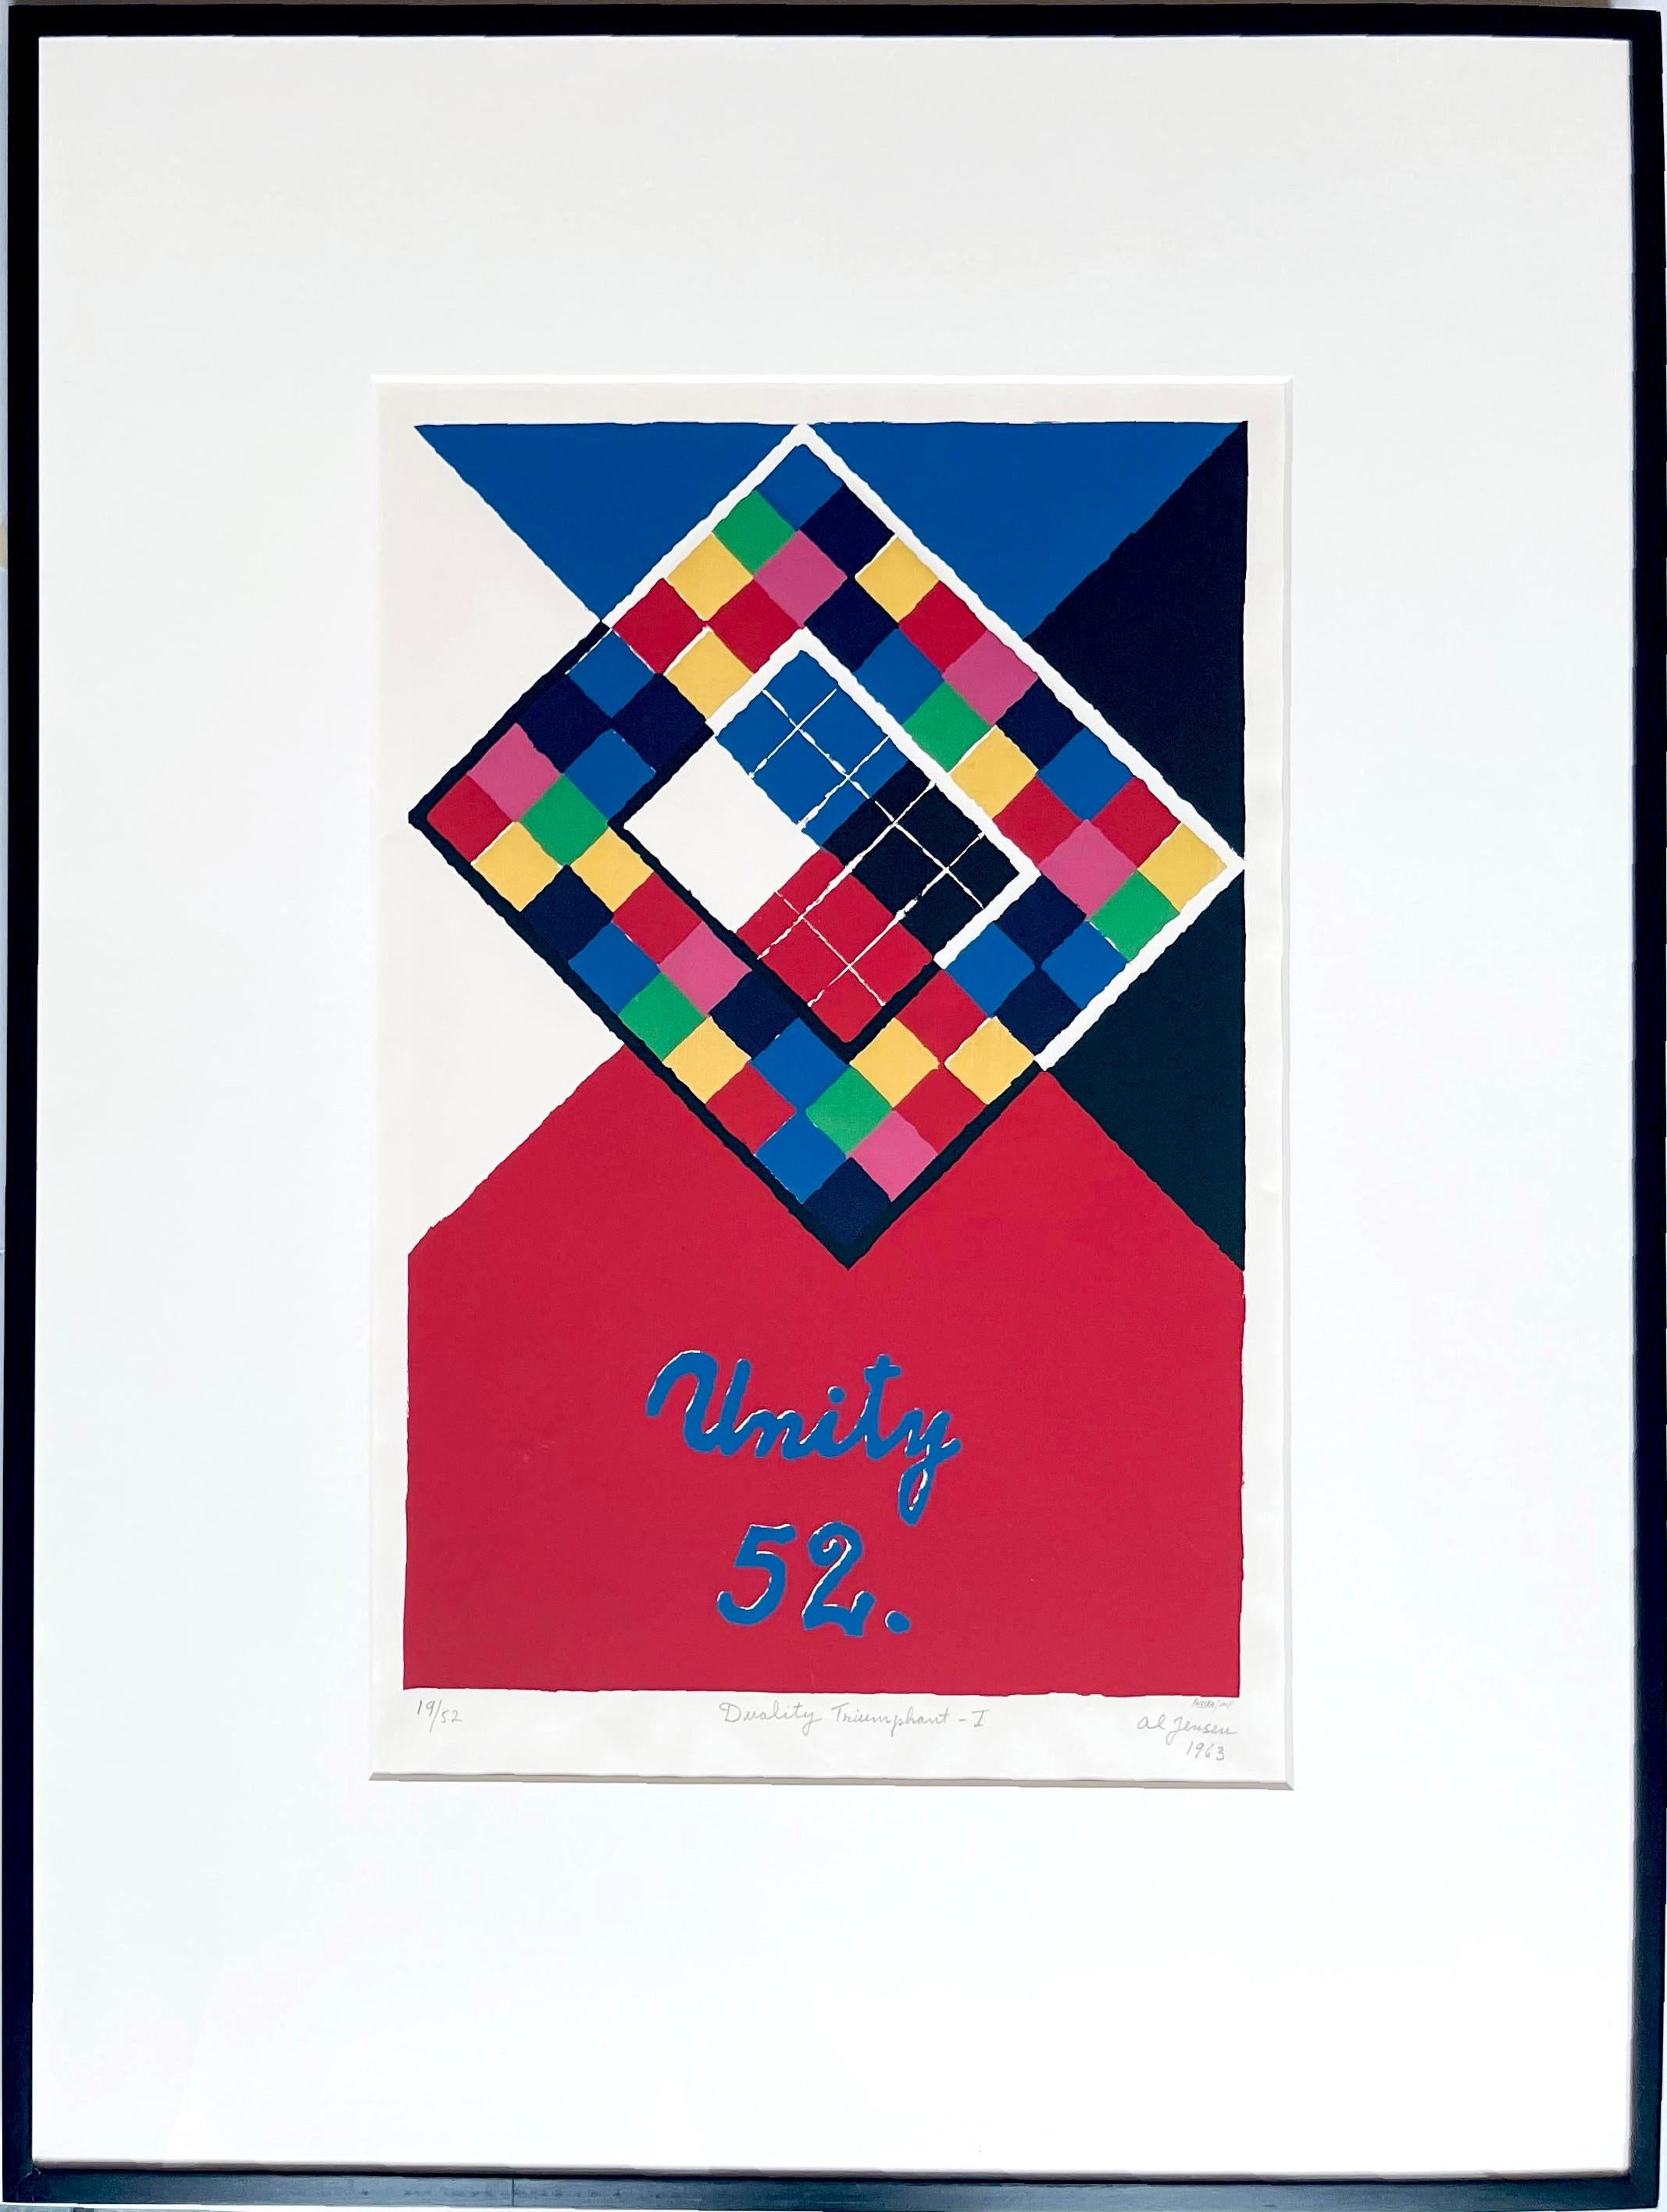 Duality Triumphant I (Mid Century Modern Geometric Abstraction) - Print by Alfred Jensen